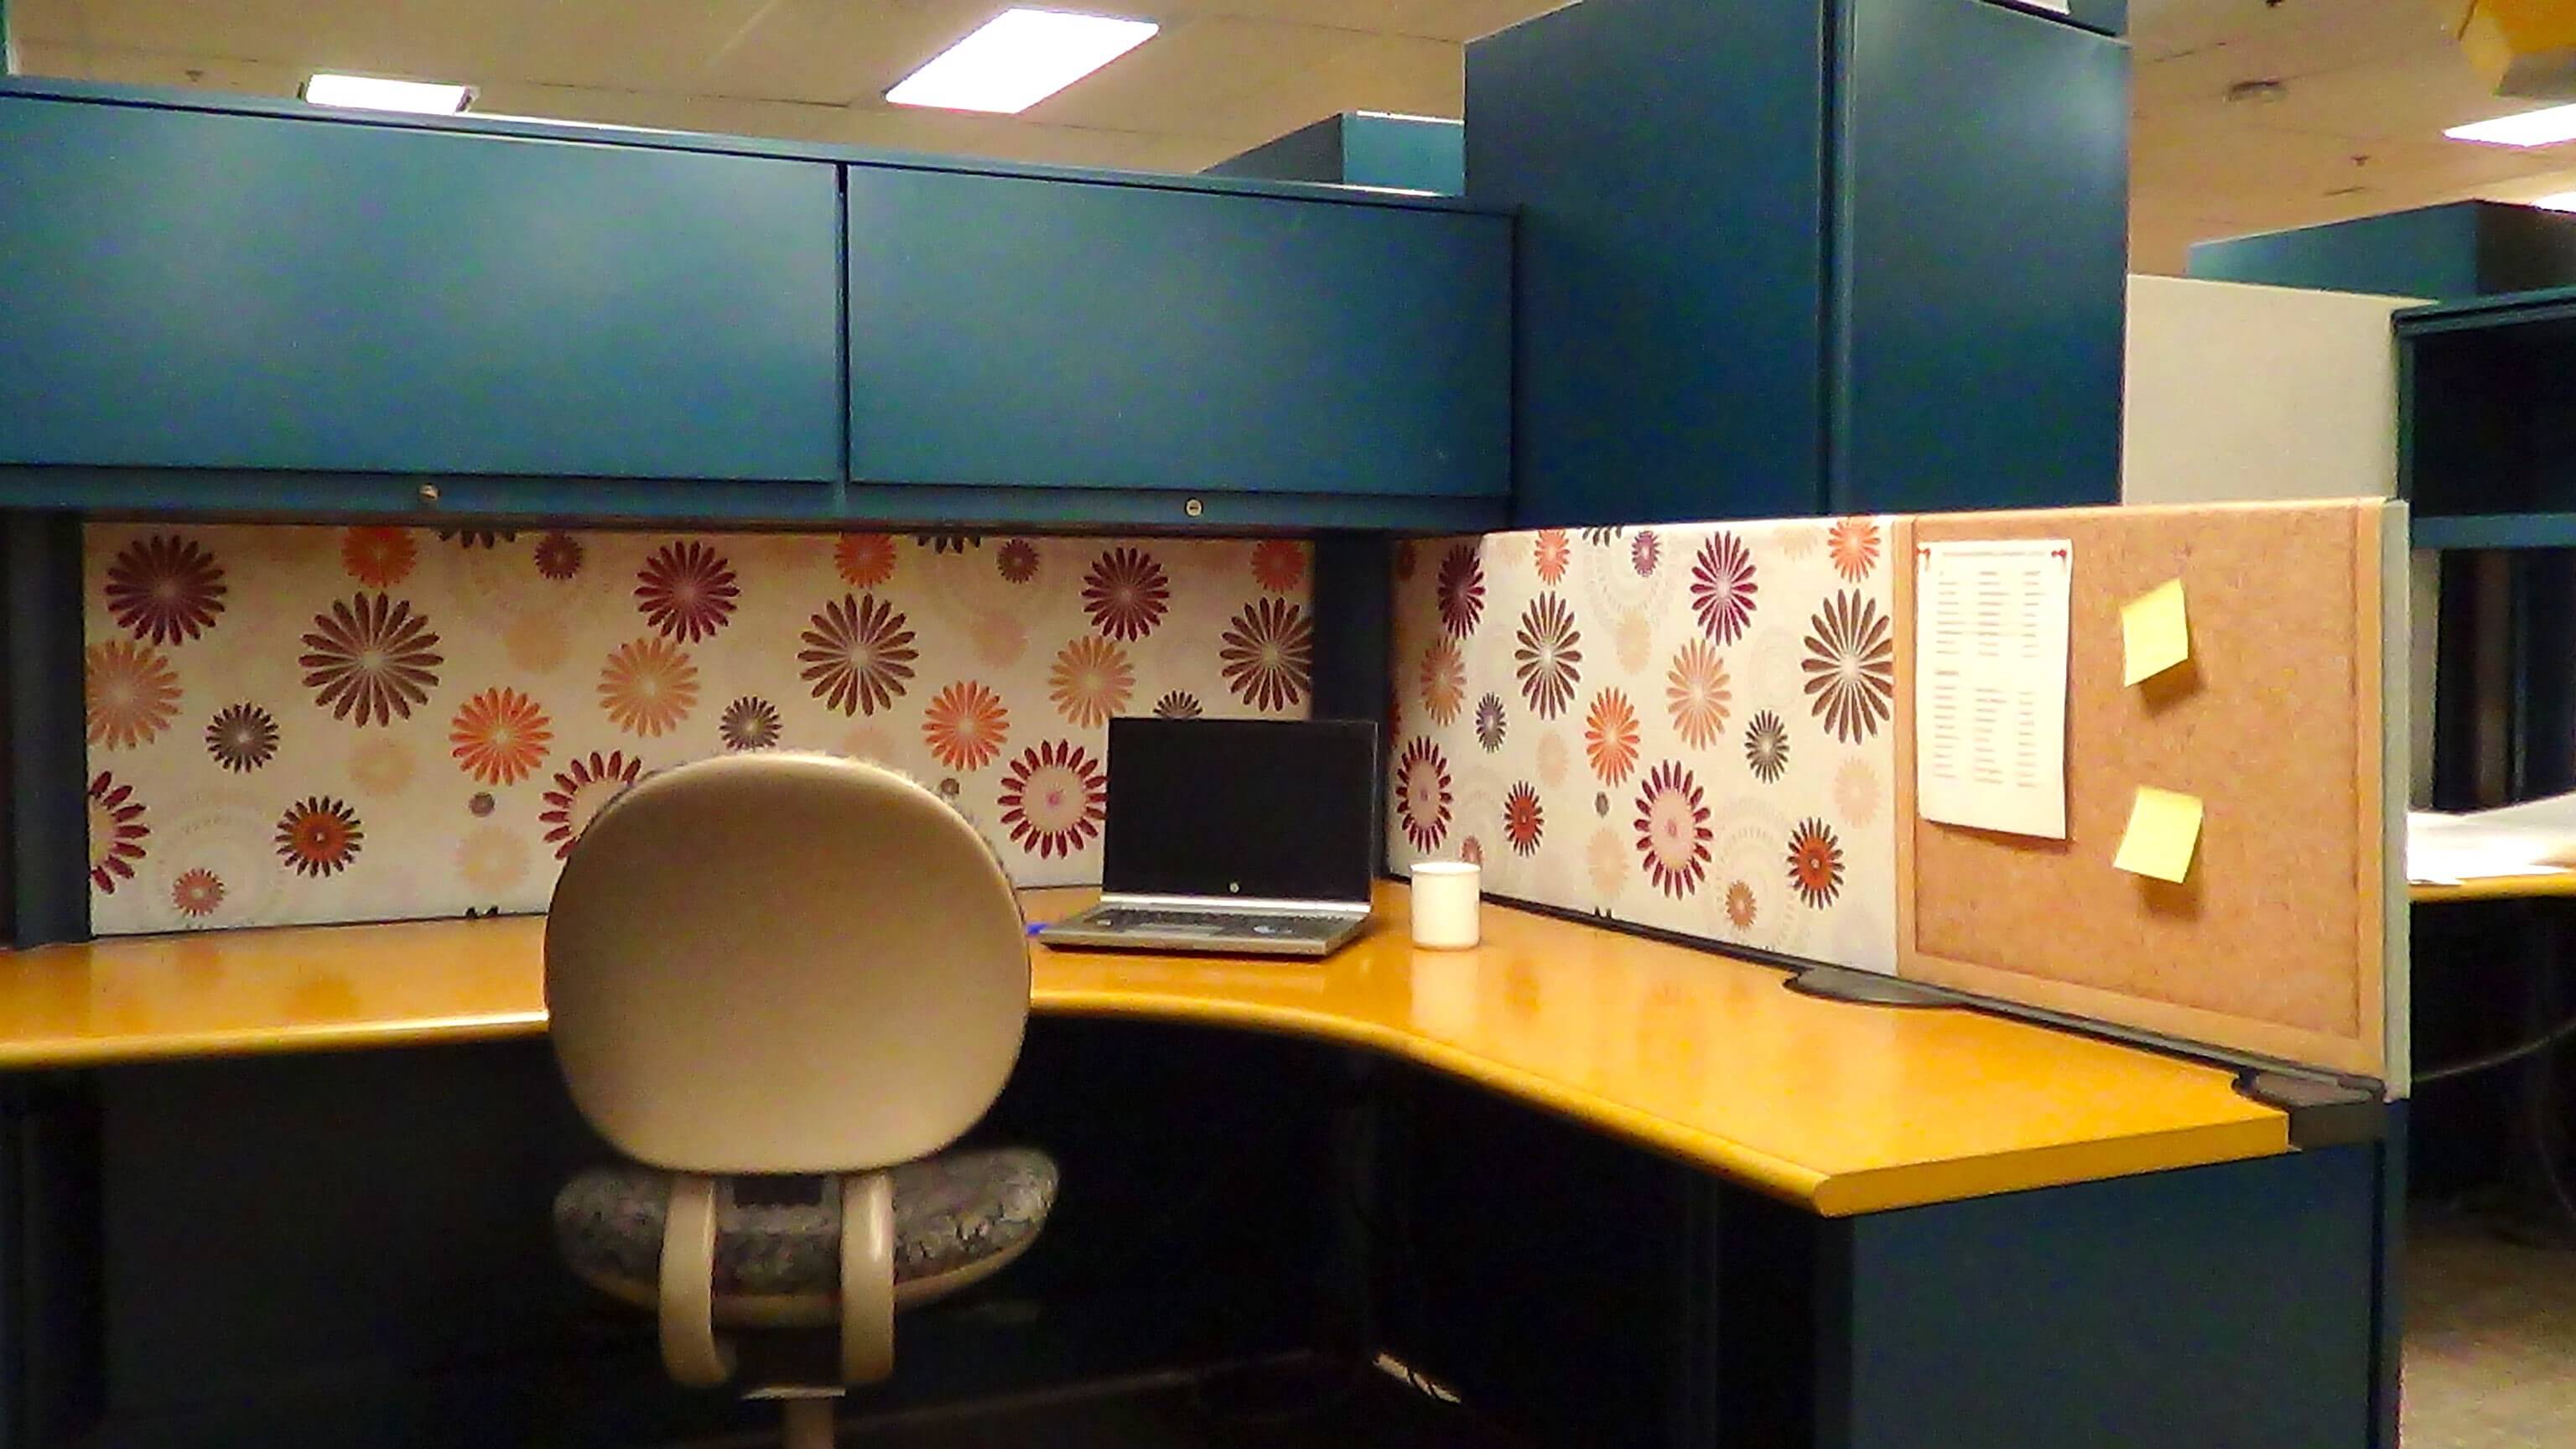 Removable cubicle wallpaper